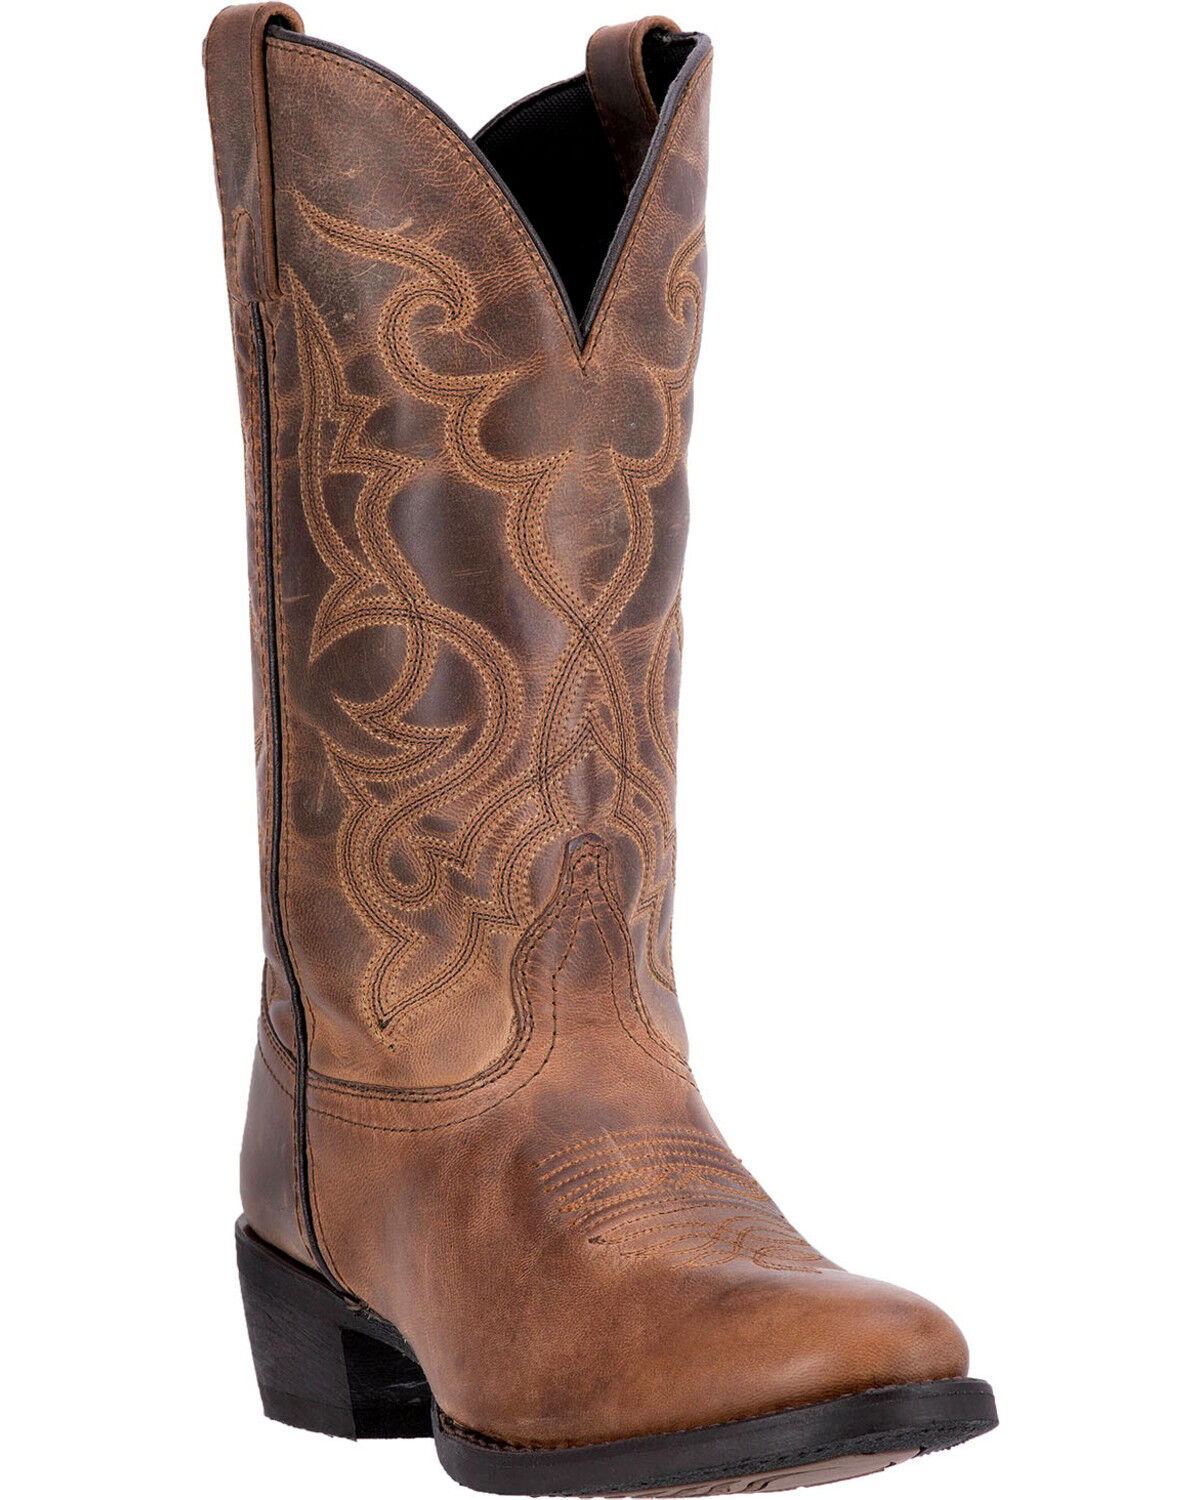 Best Selling Cowgirl Boots in Canada 